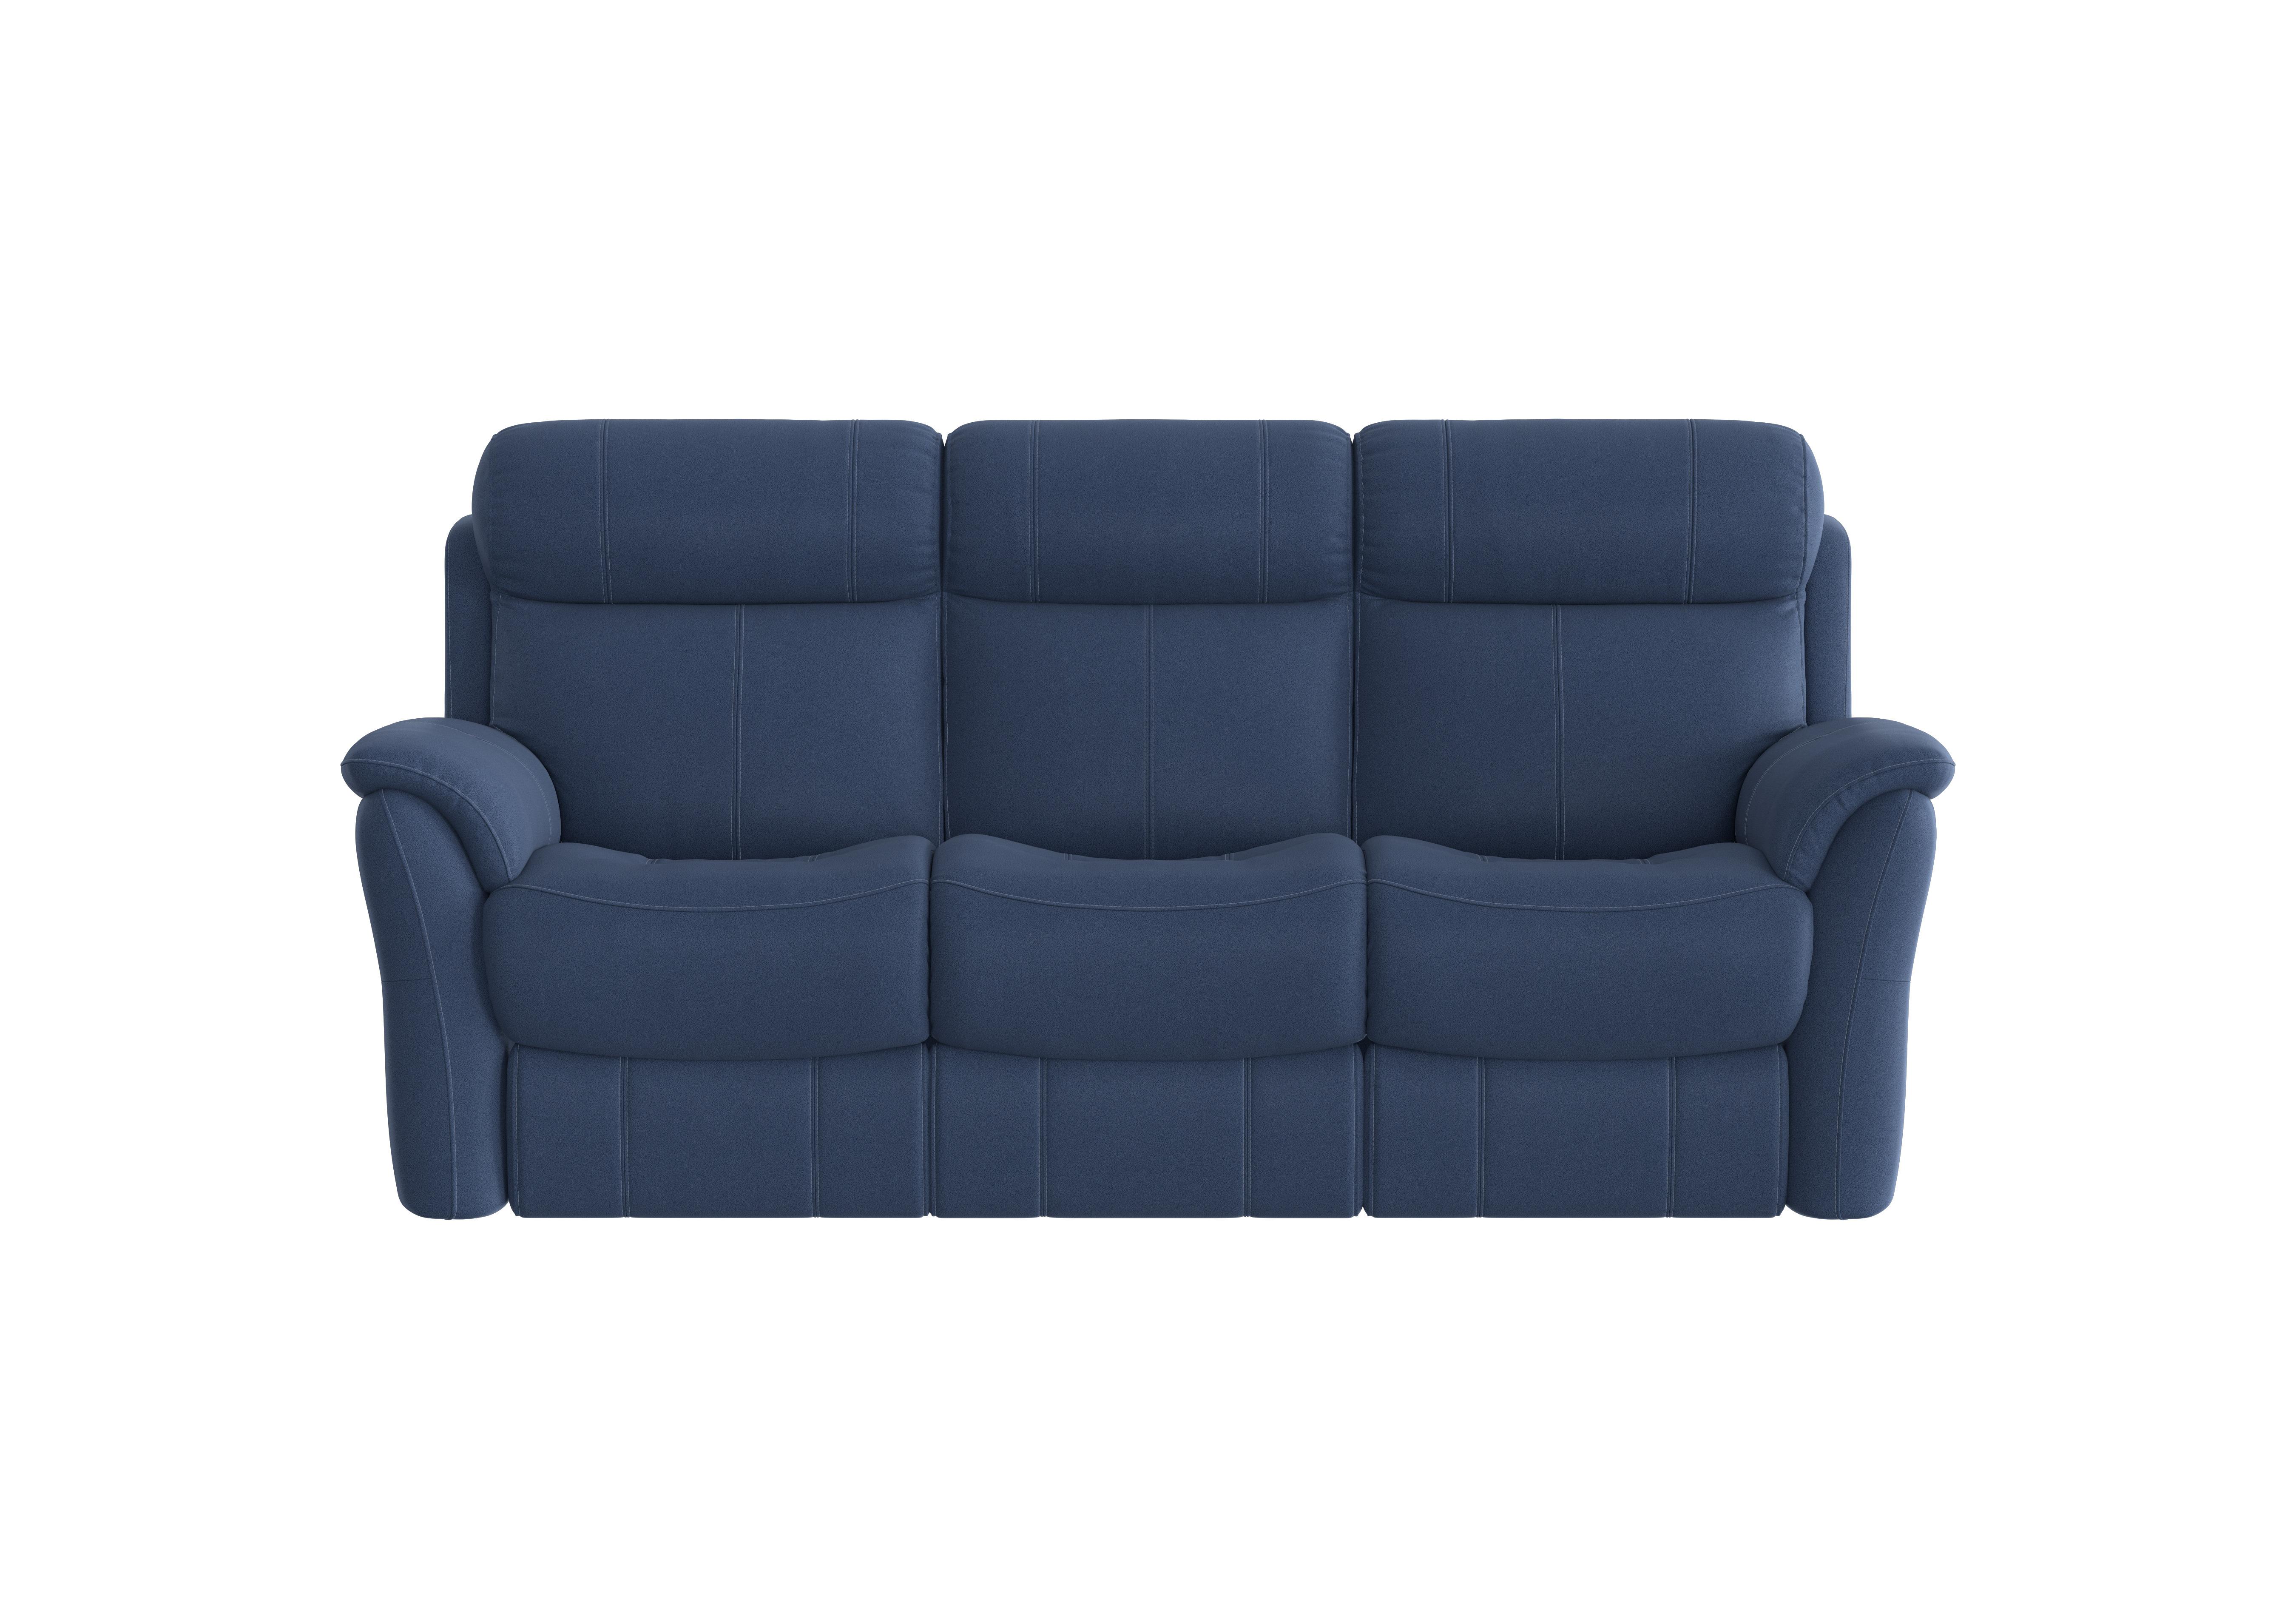 Relax Station Revive 3 Seater Fabric Sofa in Bfa-Blj-R10 Blue on Furniture Village